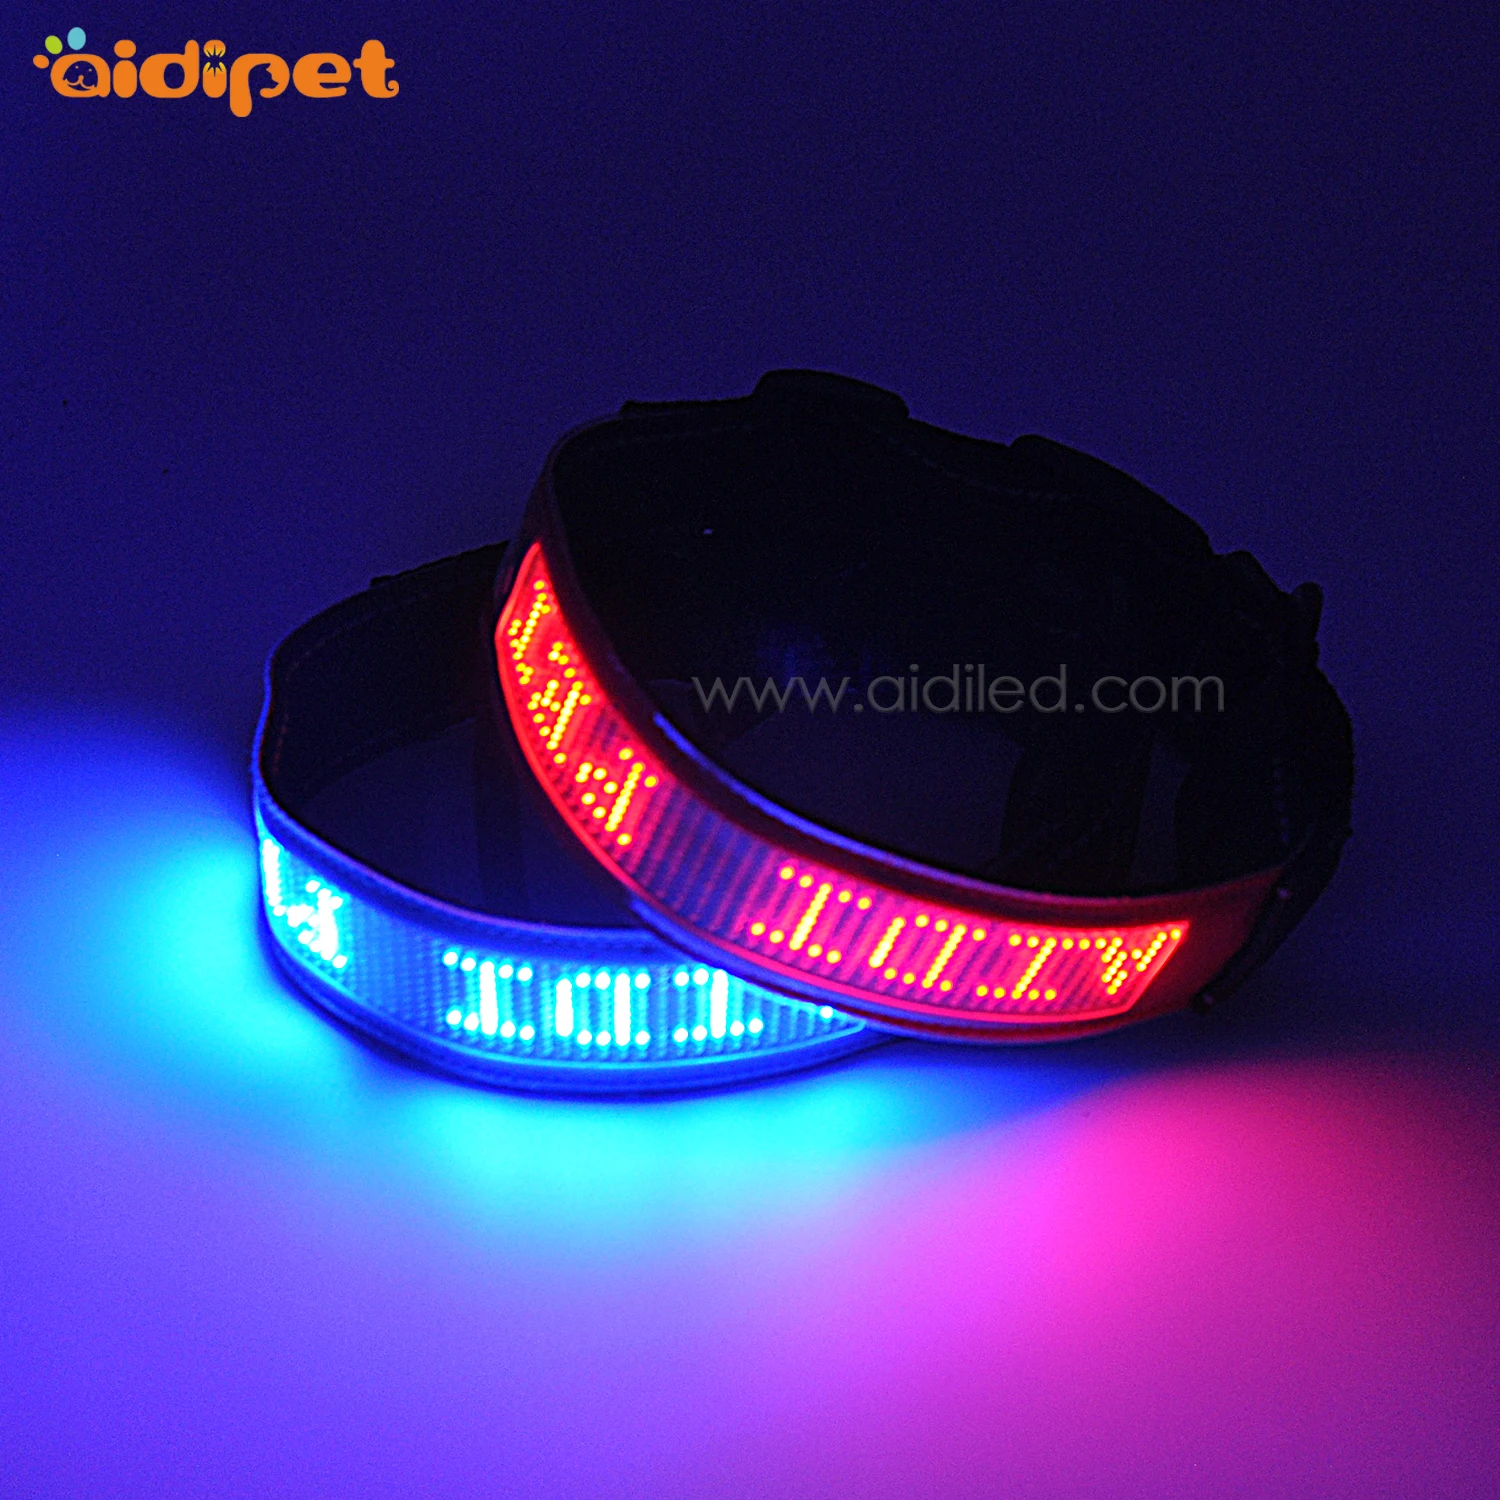 APP Controlled Led Smart Dog Collar Bluetooth Connection Led Screen Showing Words Collars for Dogs